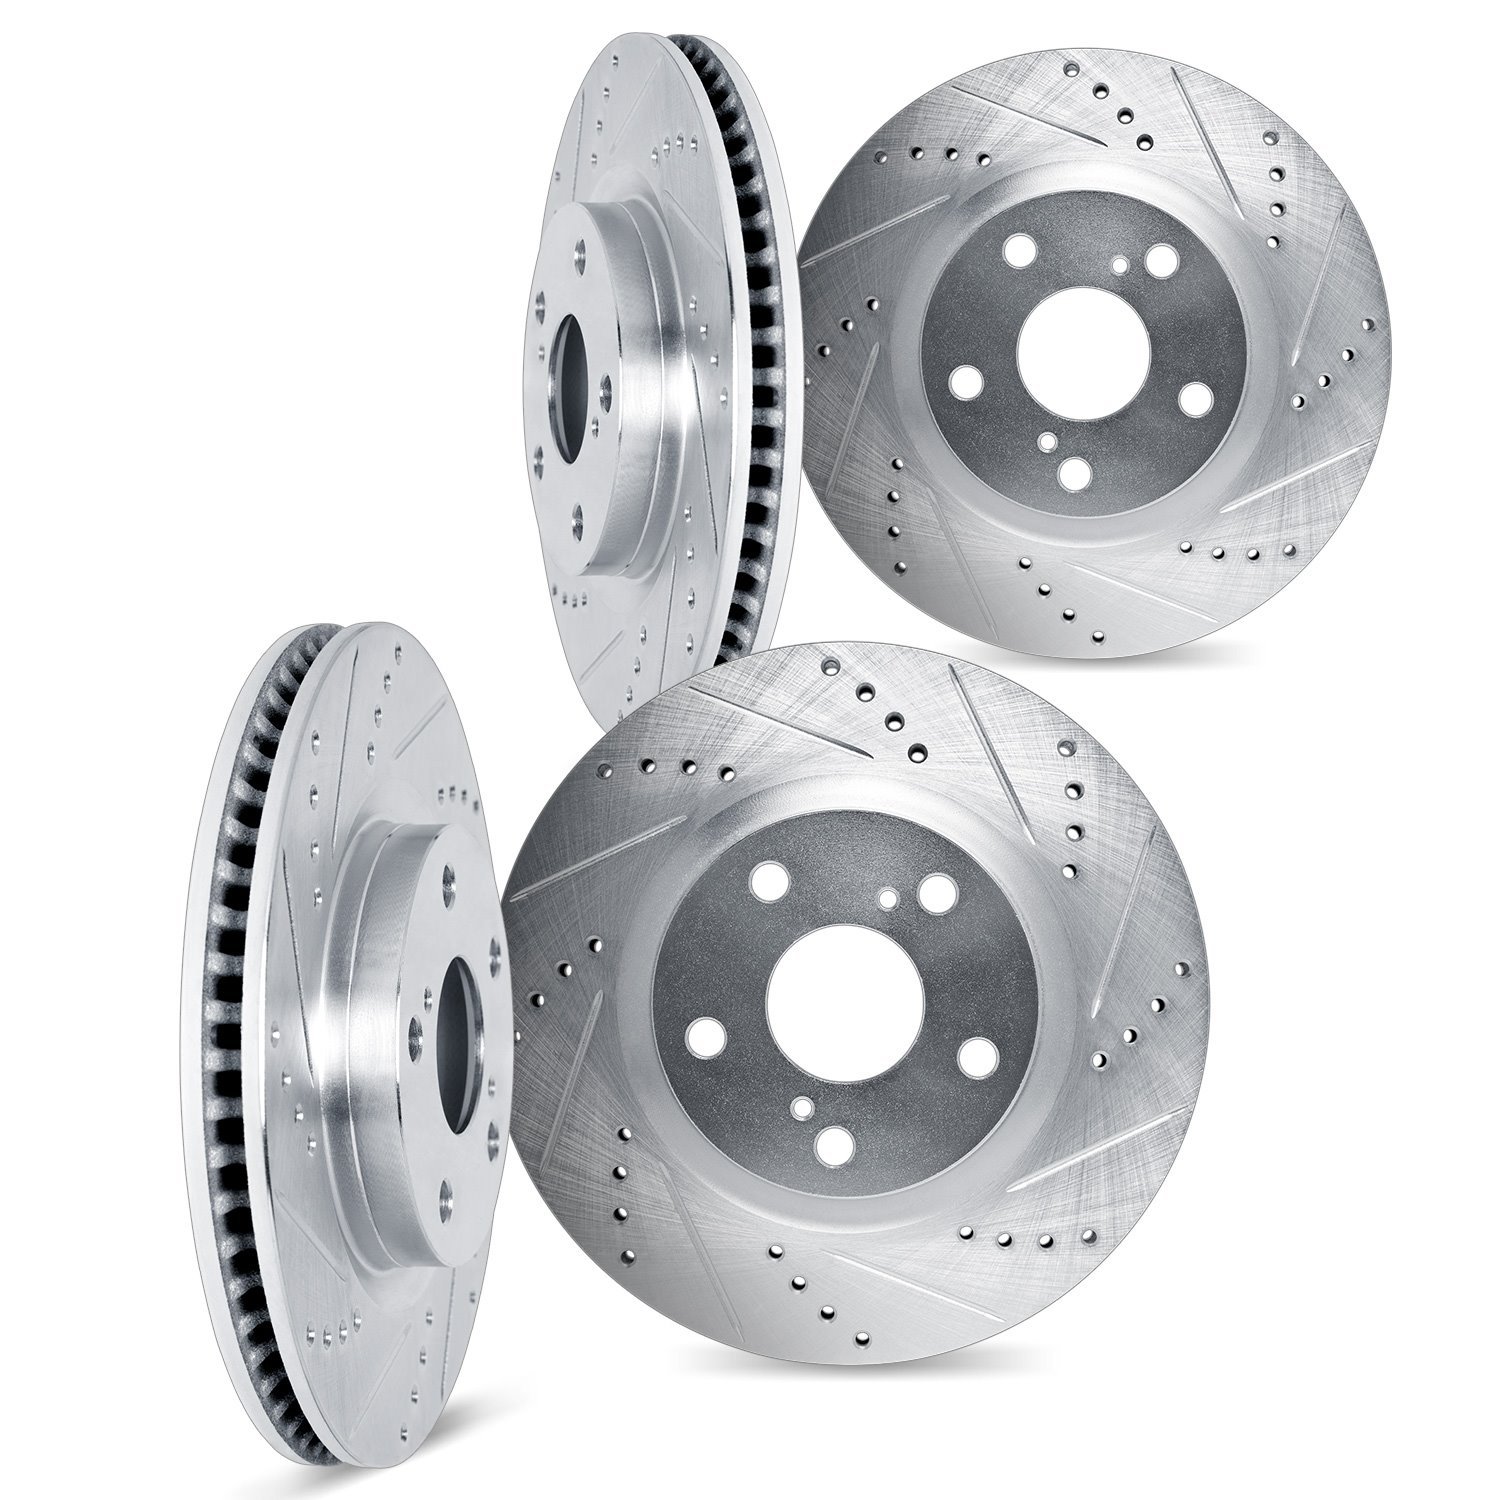 7004-55001 Drilled/Slotted Brake Rotors [Silver], Fits Select Ford/Lincoln/Mercury/Mazda, Position: Front and Rear